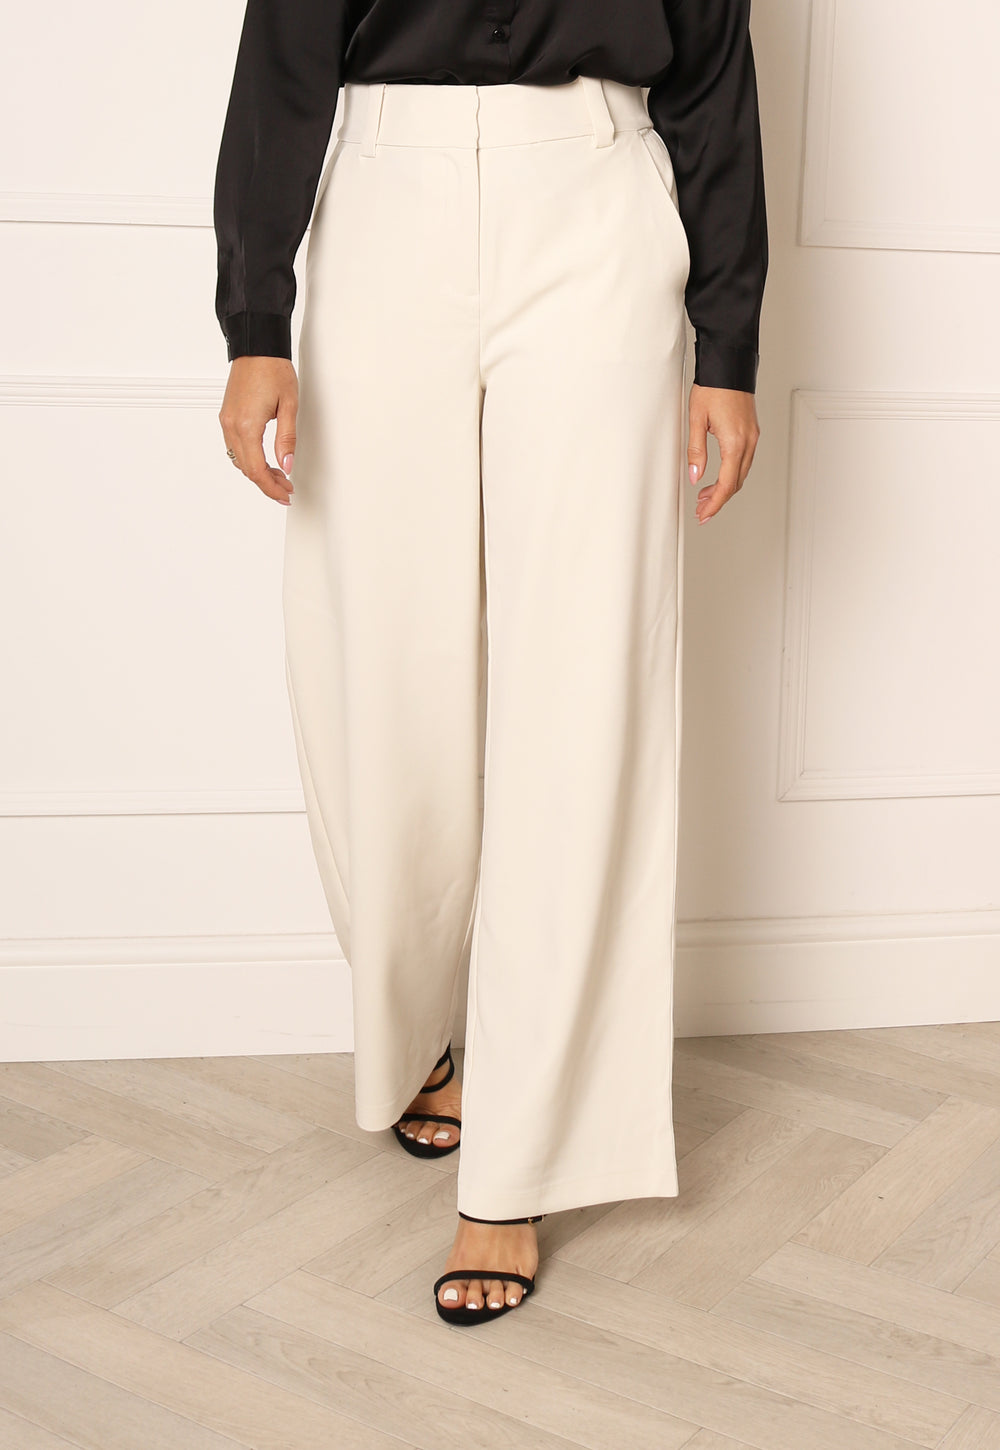 VILA Arnas Wide Leg High Waisted Trousers in Cream - One Nation Clothing